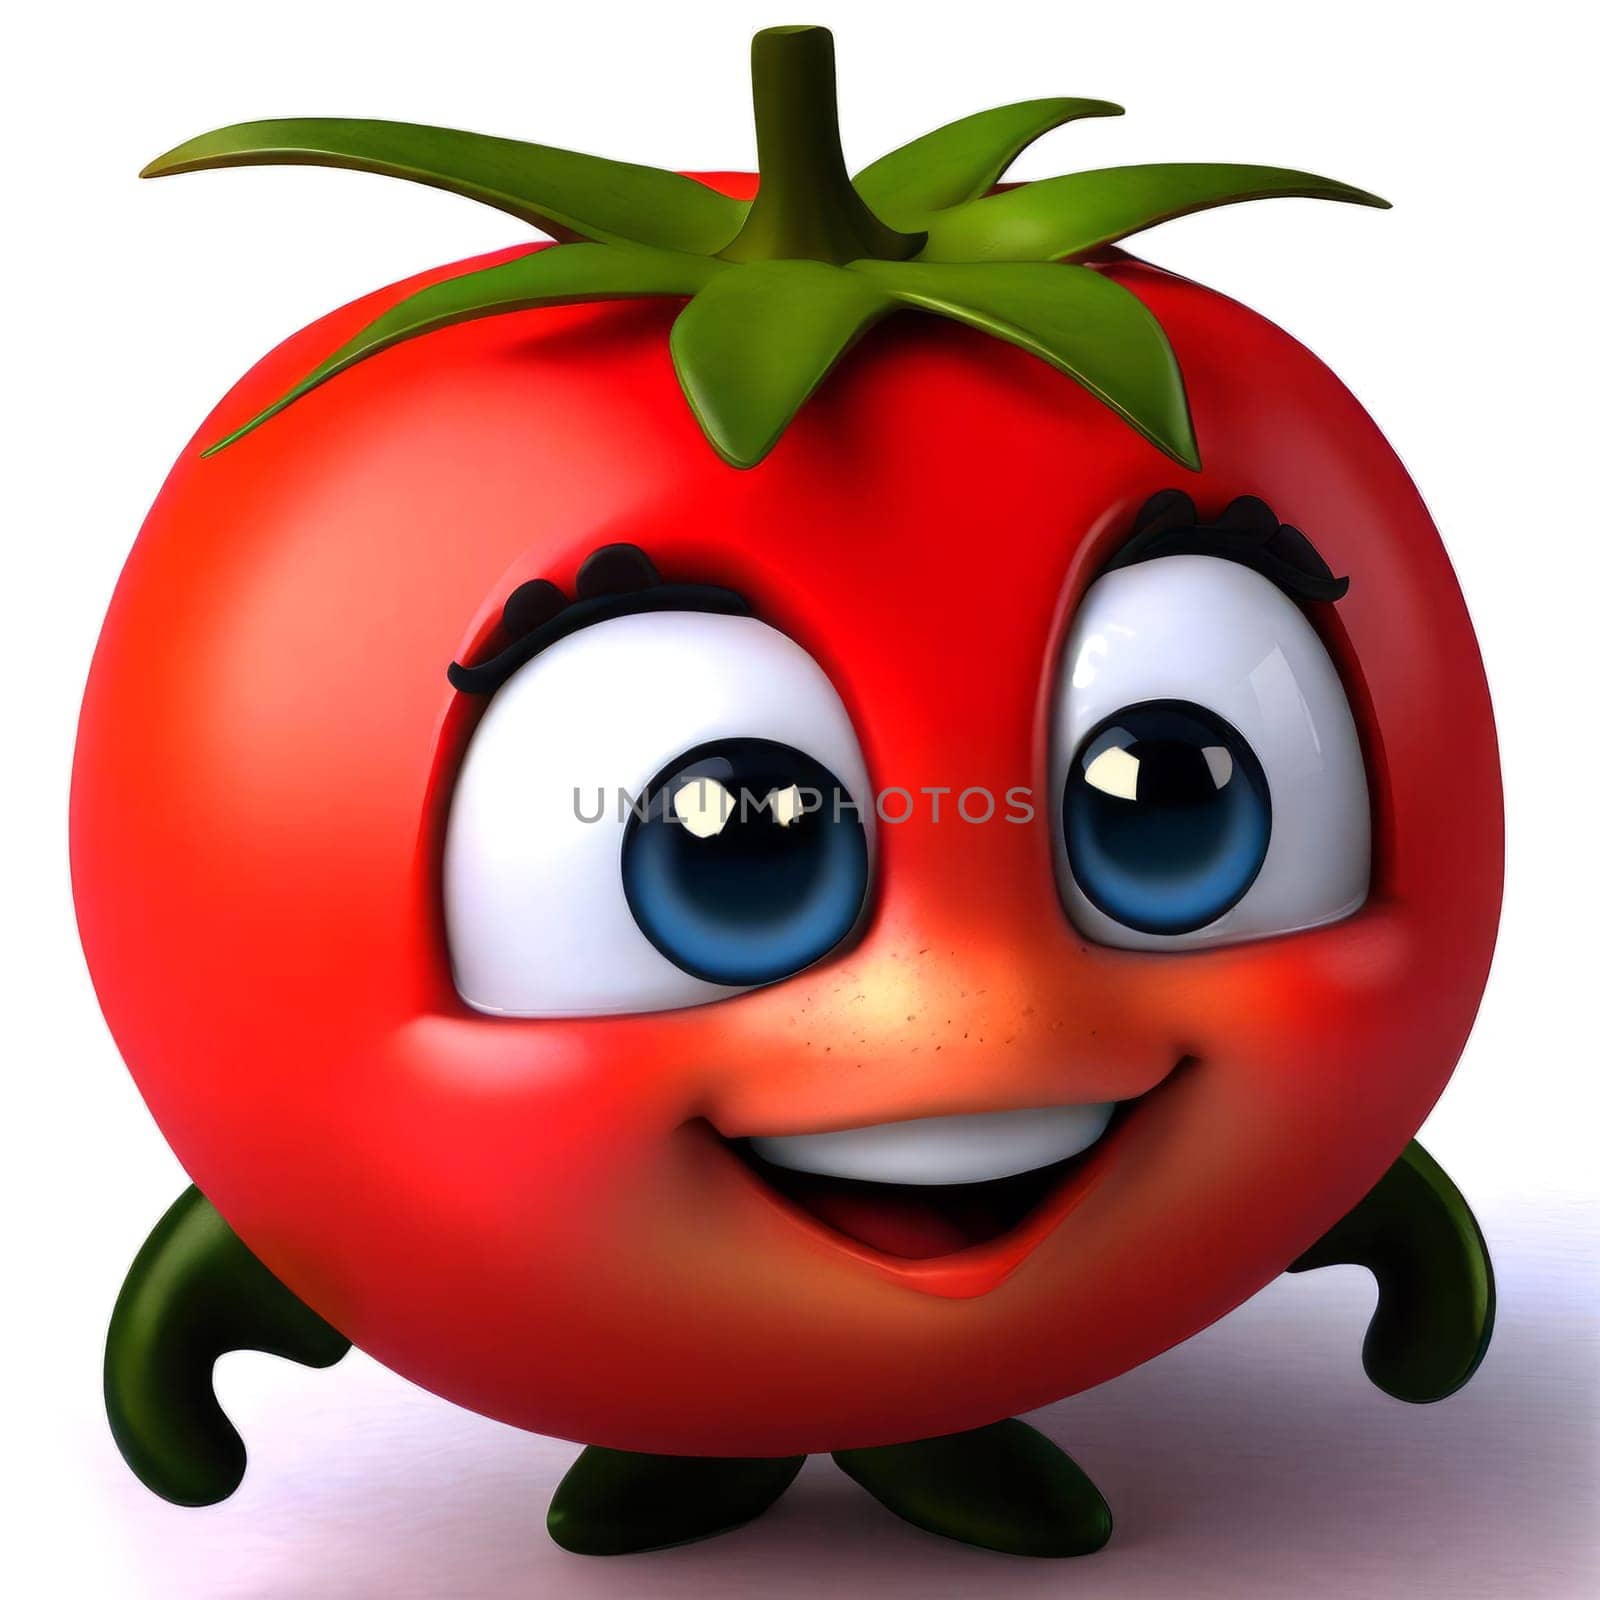 Cute cartoon 3d character of smiling tomato by clusterx